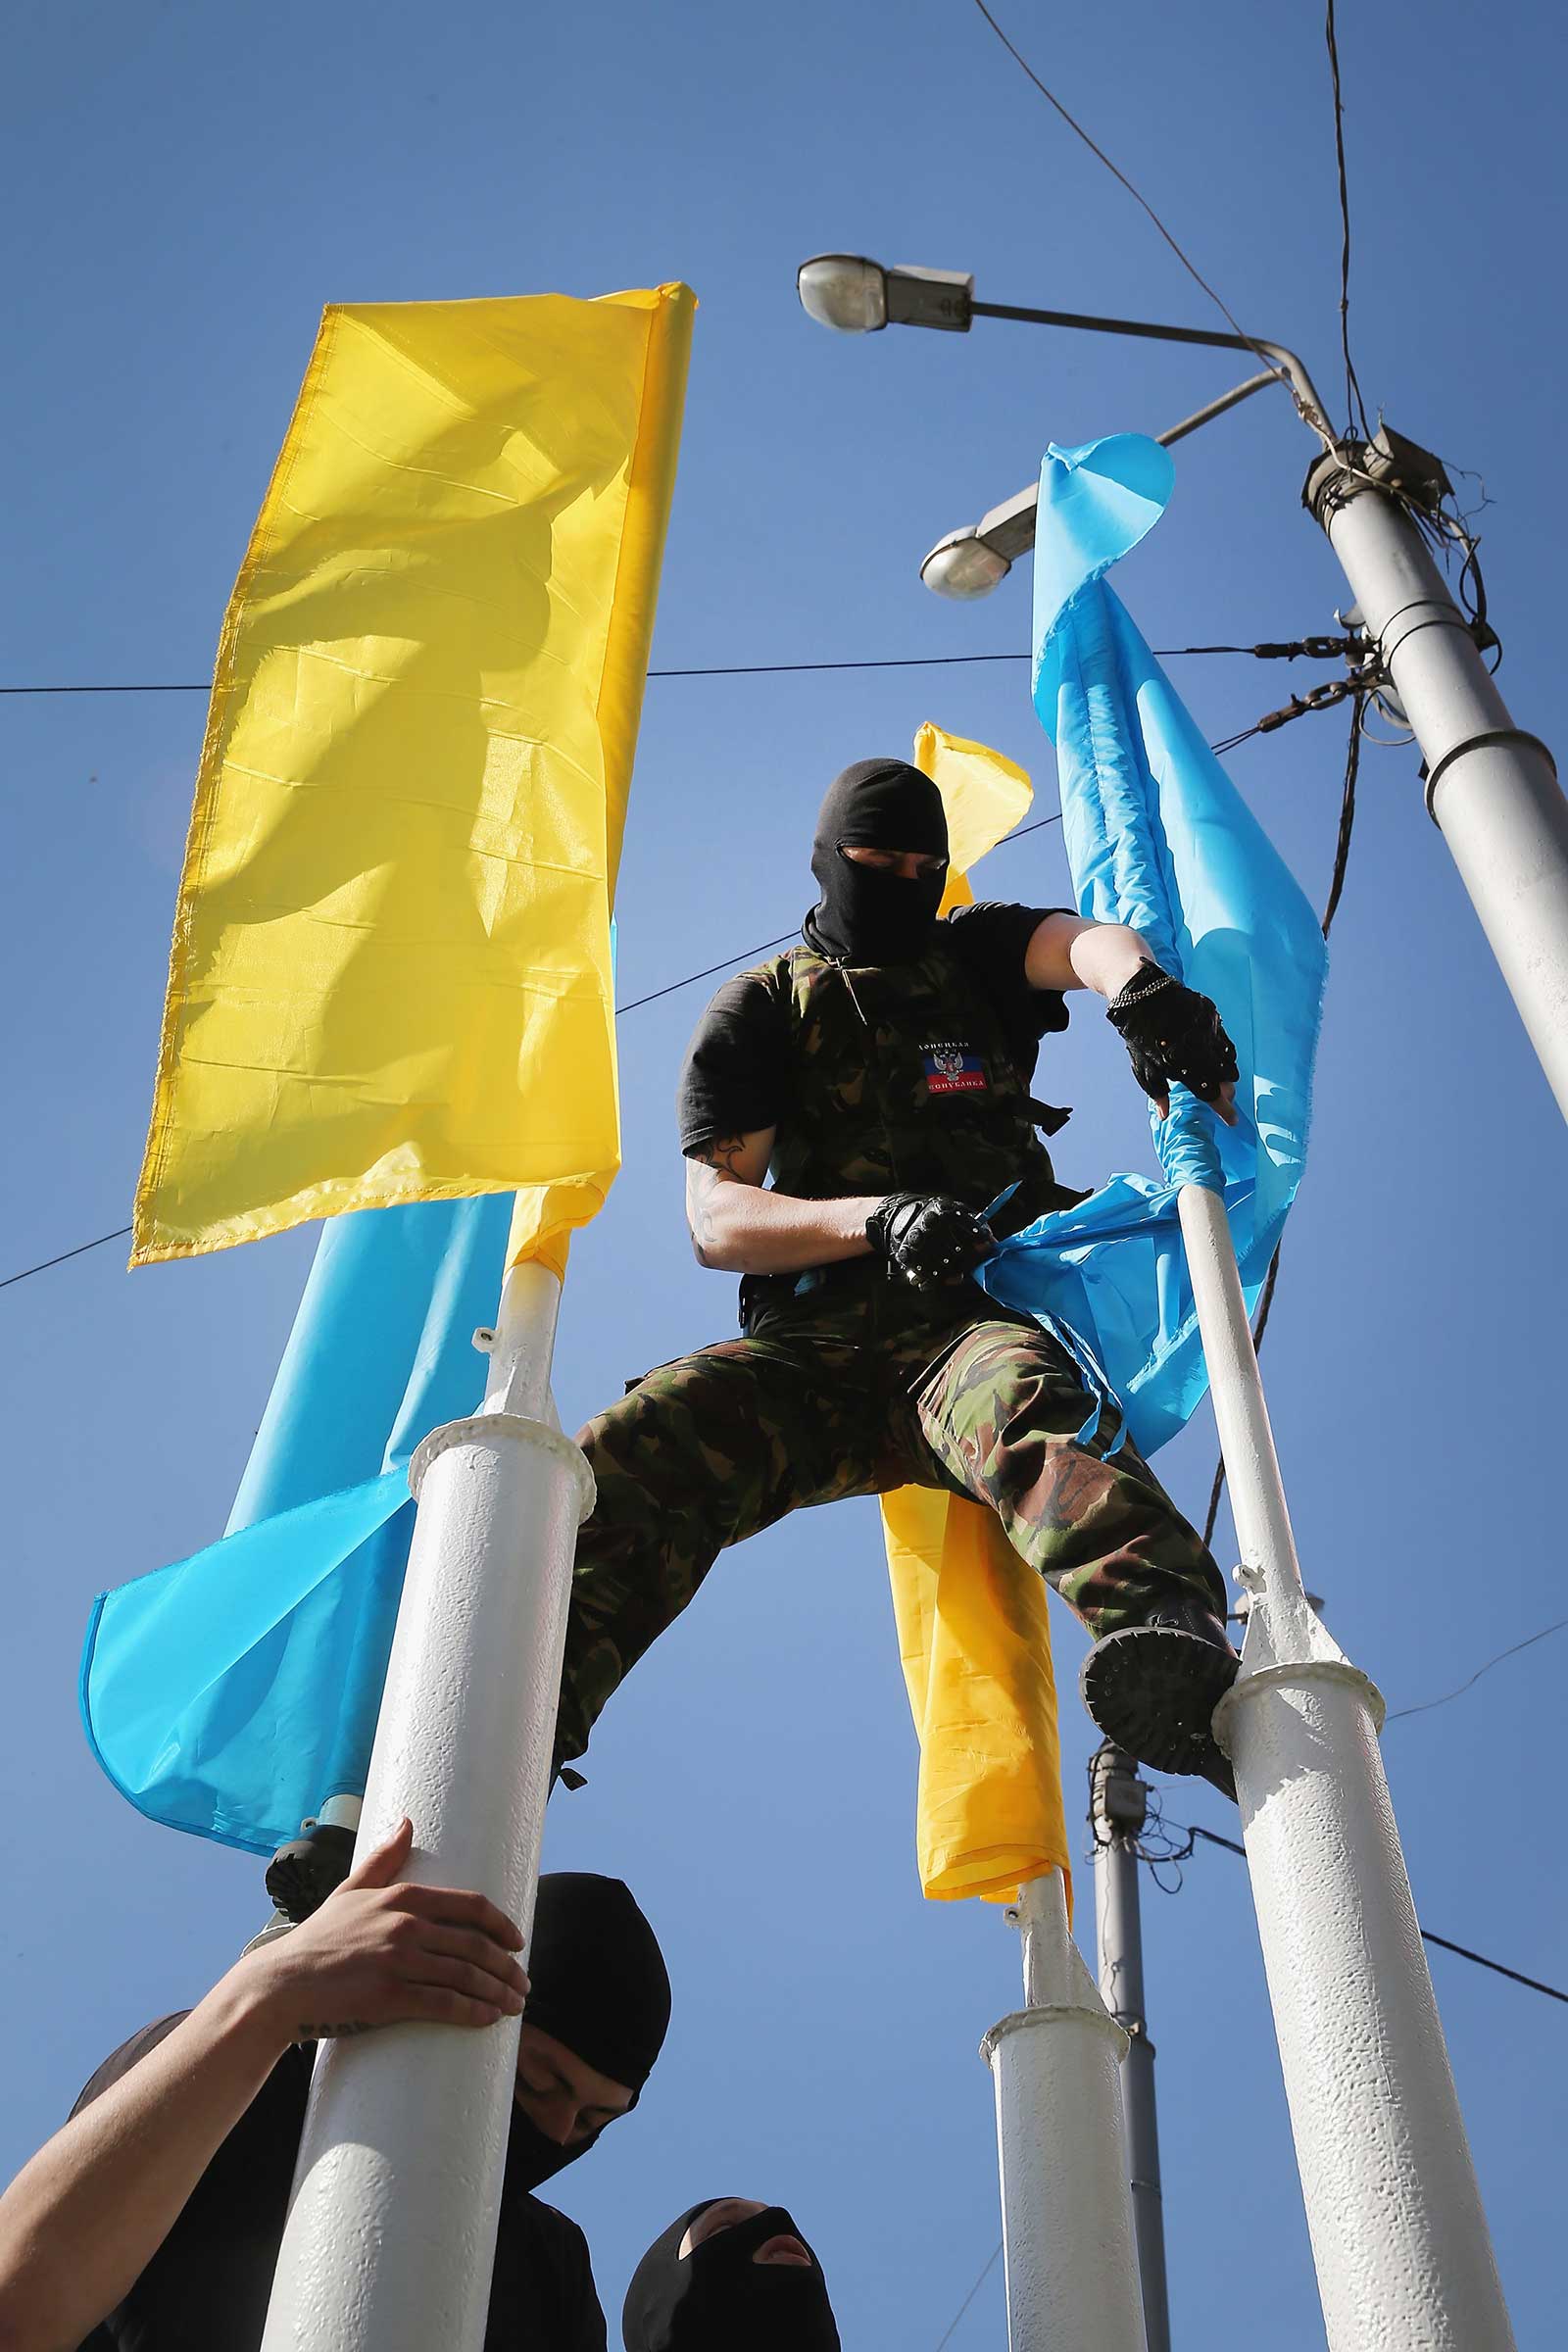 Pro-Russian Taking Down Flags with Ukranian colors